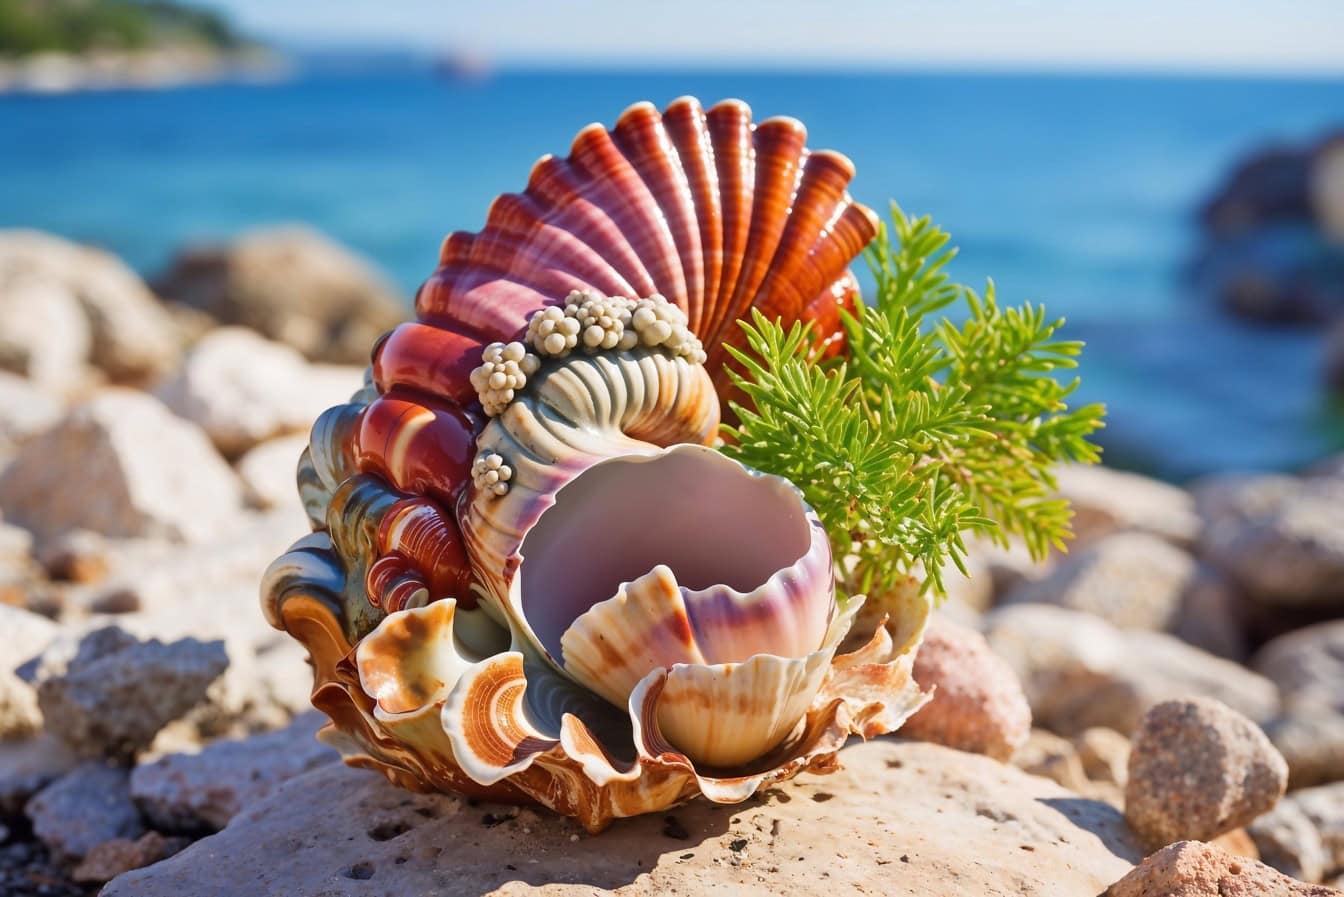 Extraordinary decorative composition of colorful sea shells on a beach